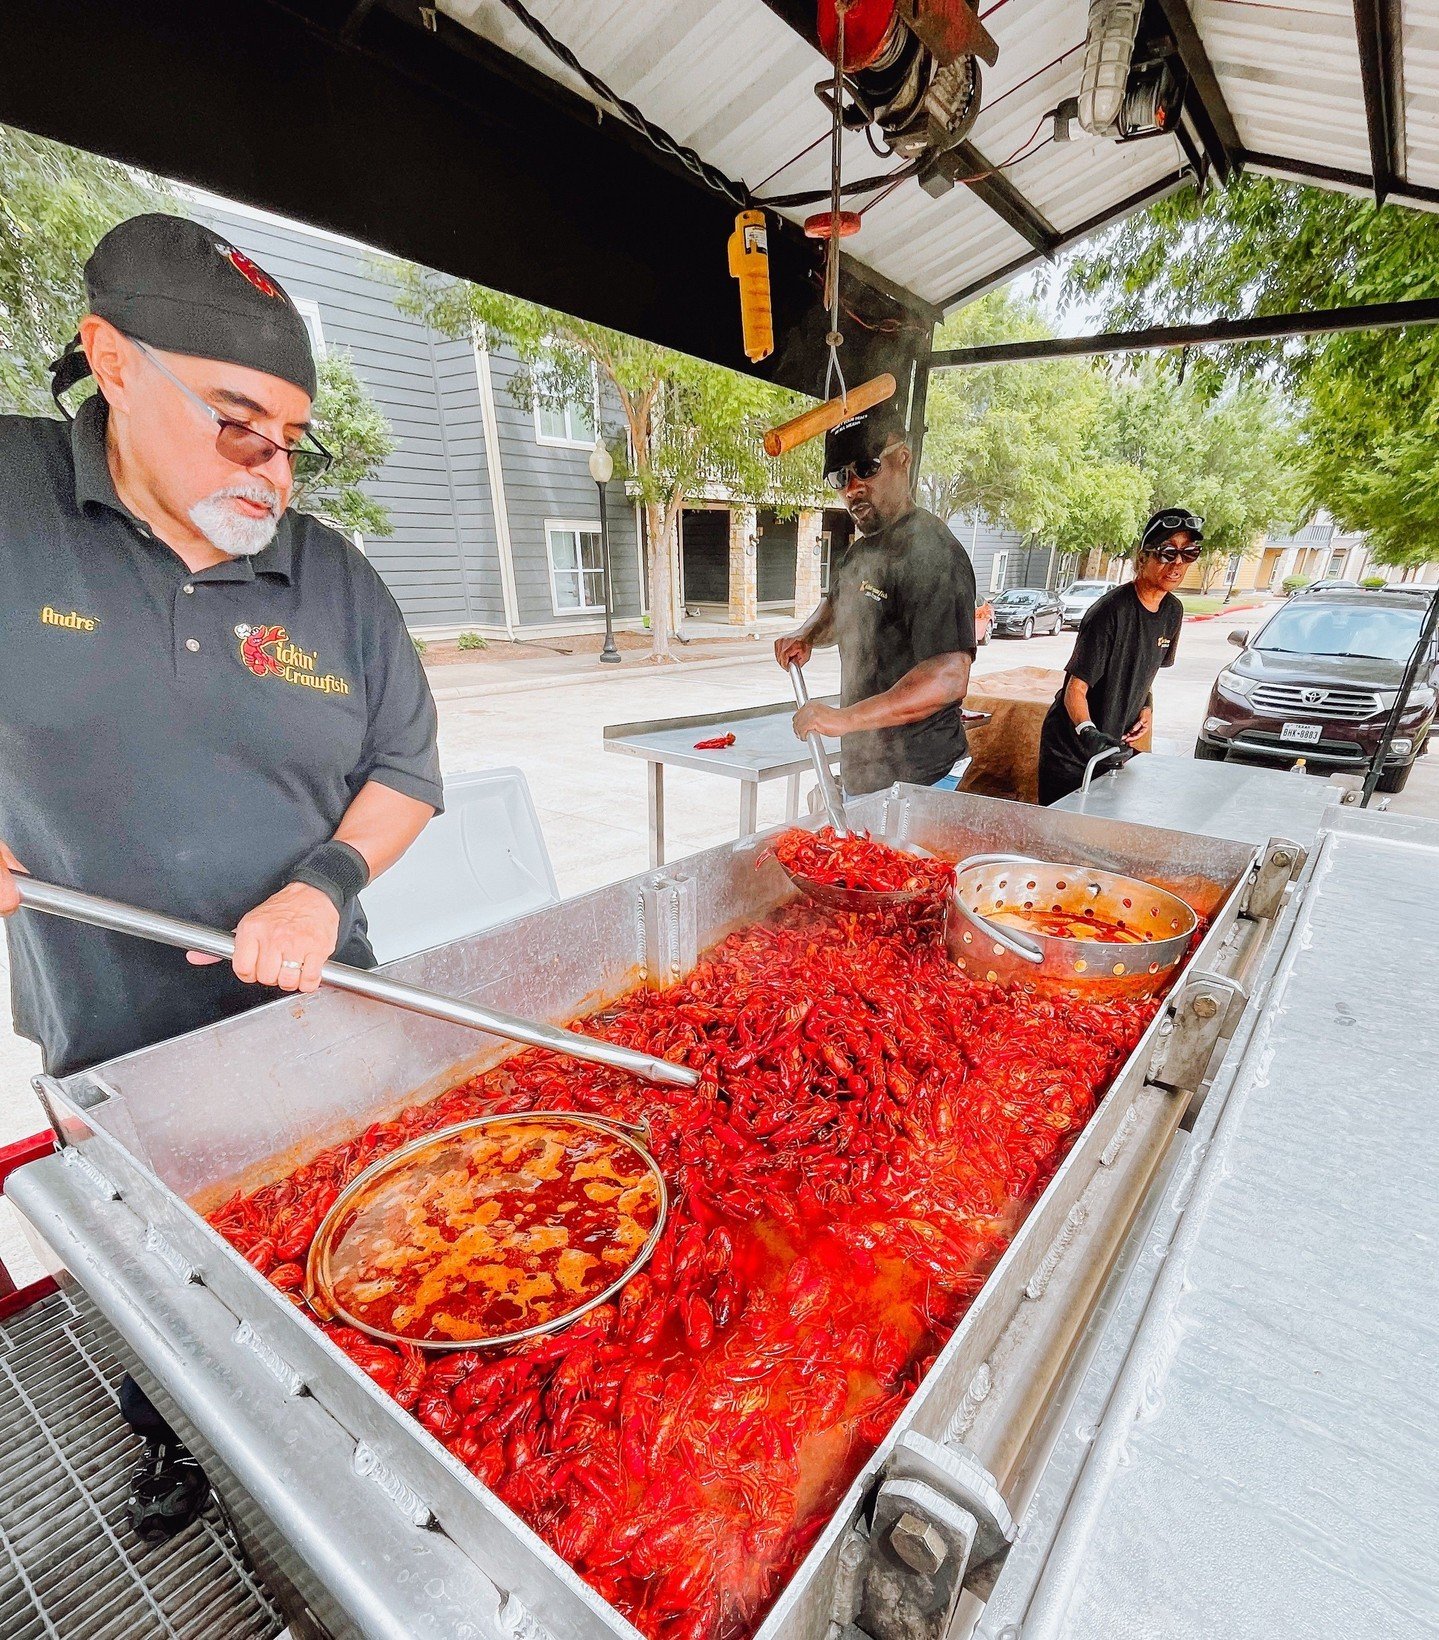 Resident life events just keep getting better and better! Our recent crawfish boil was a huge success, but we're not done yet! Stay tuned for more epic events as we make the most of this school year. Let's keep the excitement going!